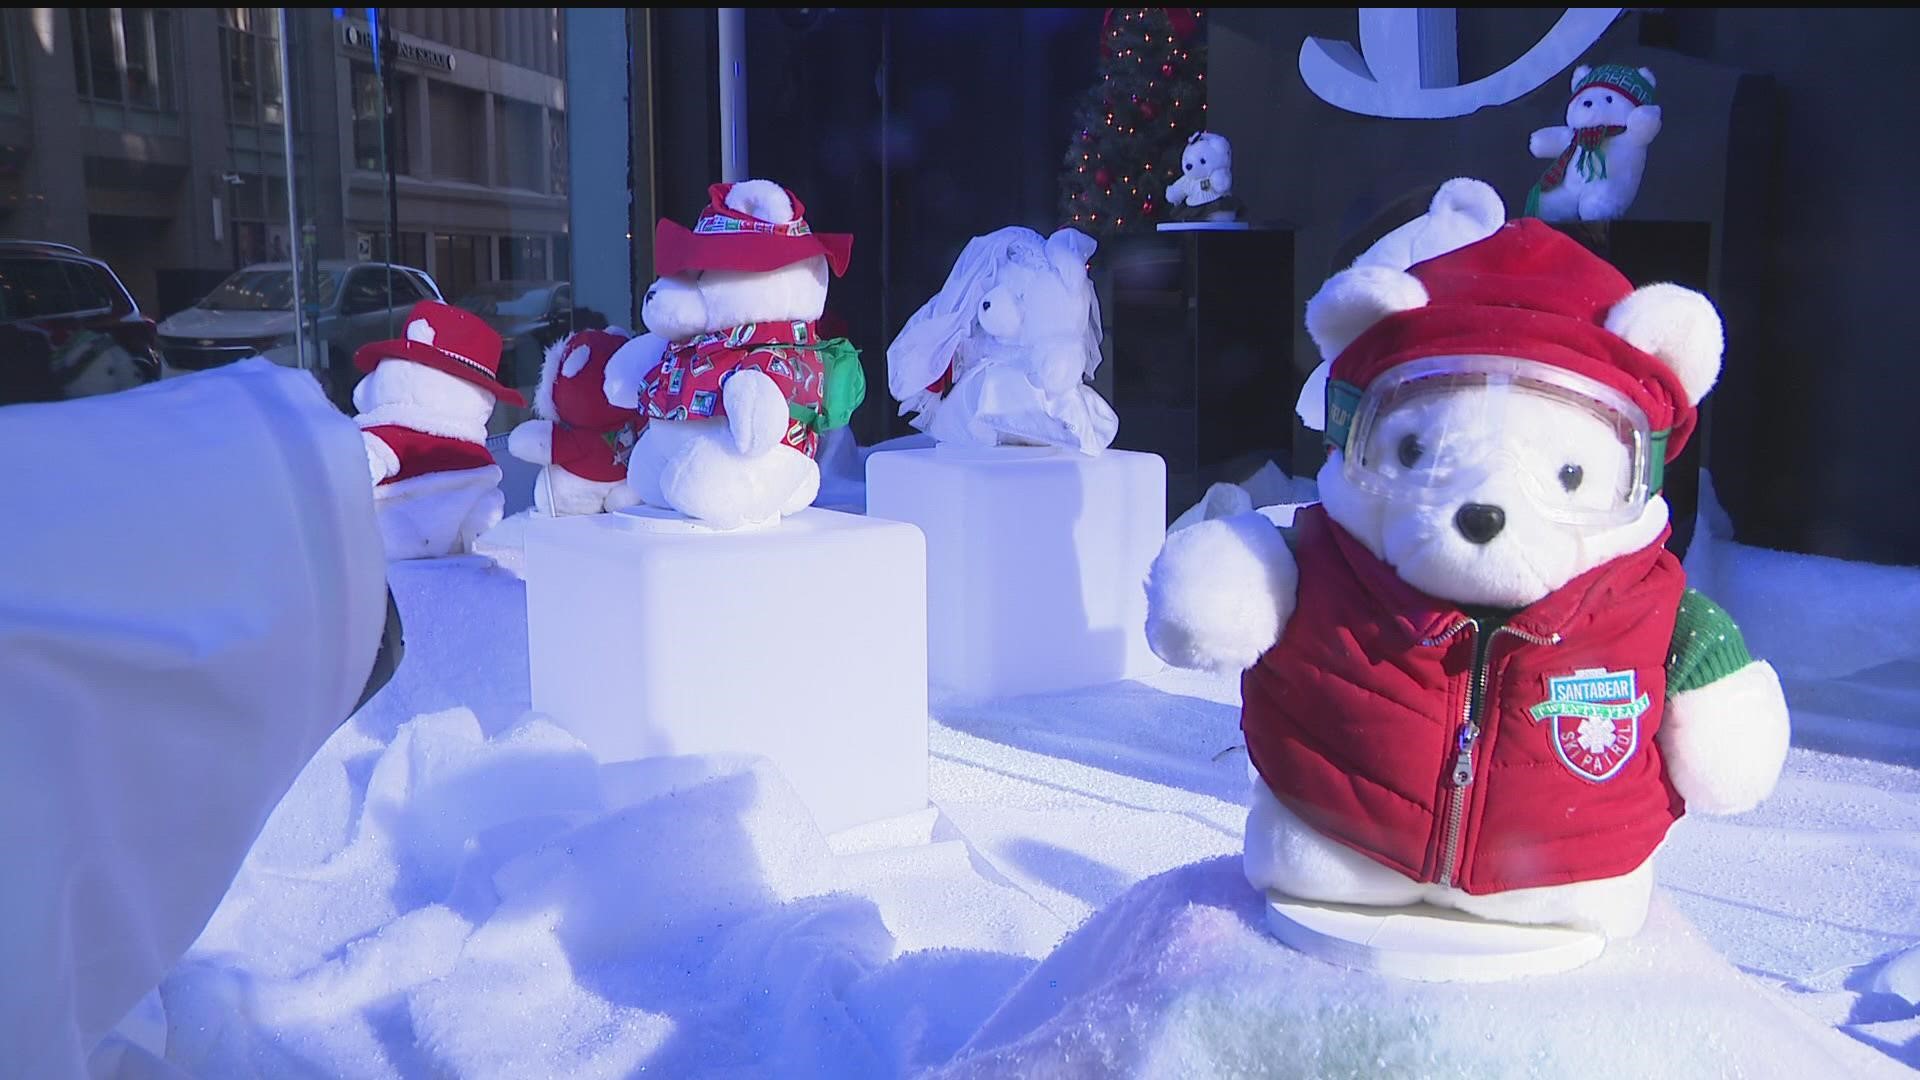 The Santa Bears took a 15-year-long break, but they're back.